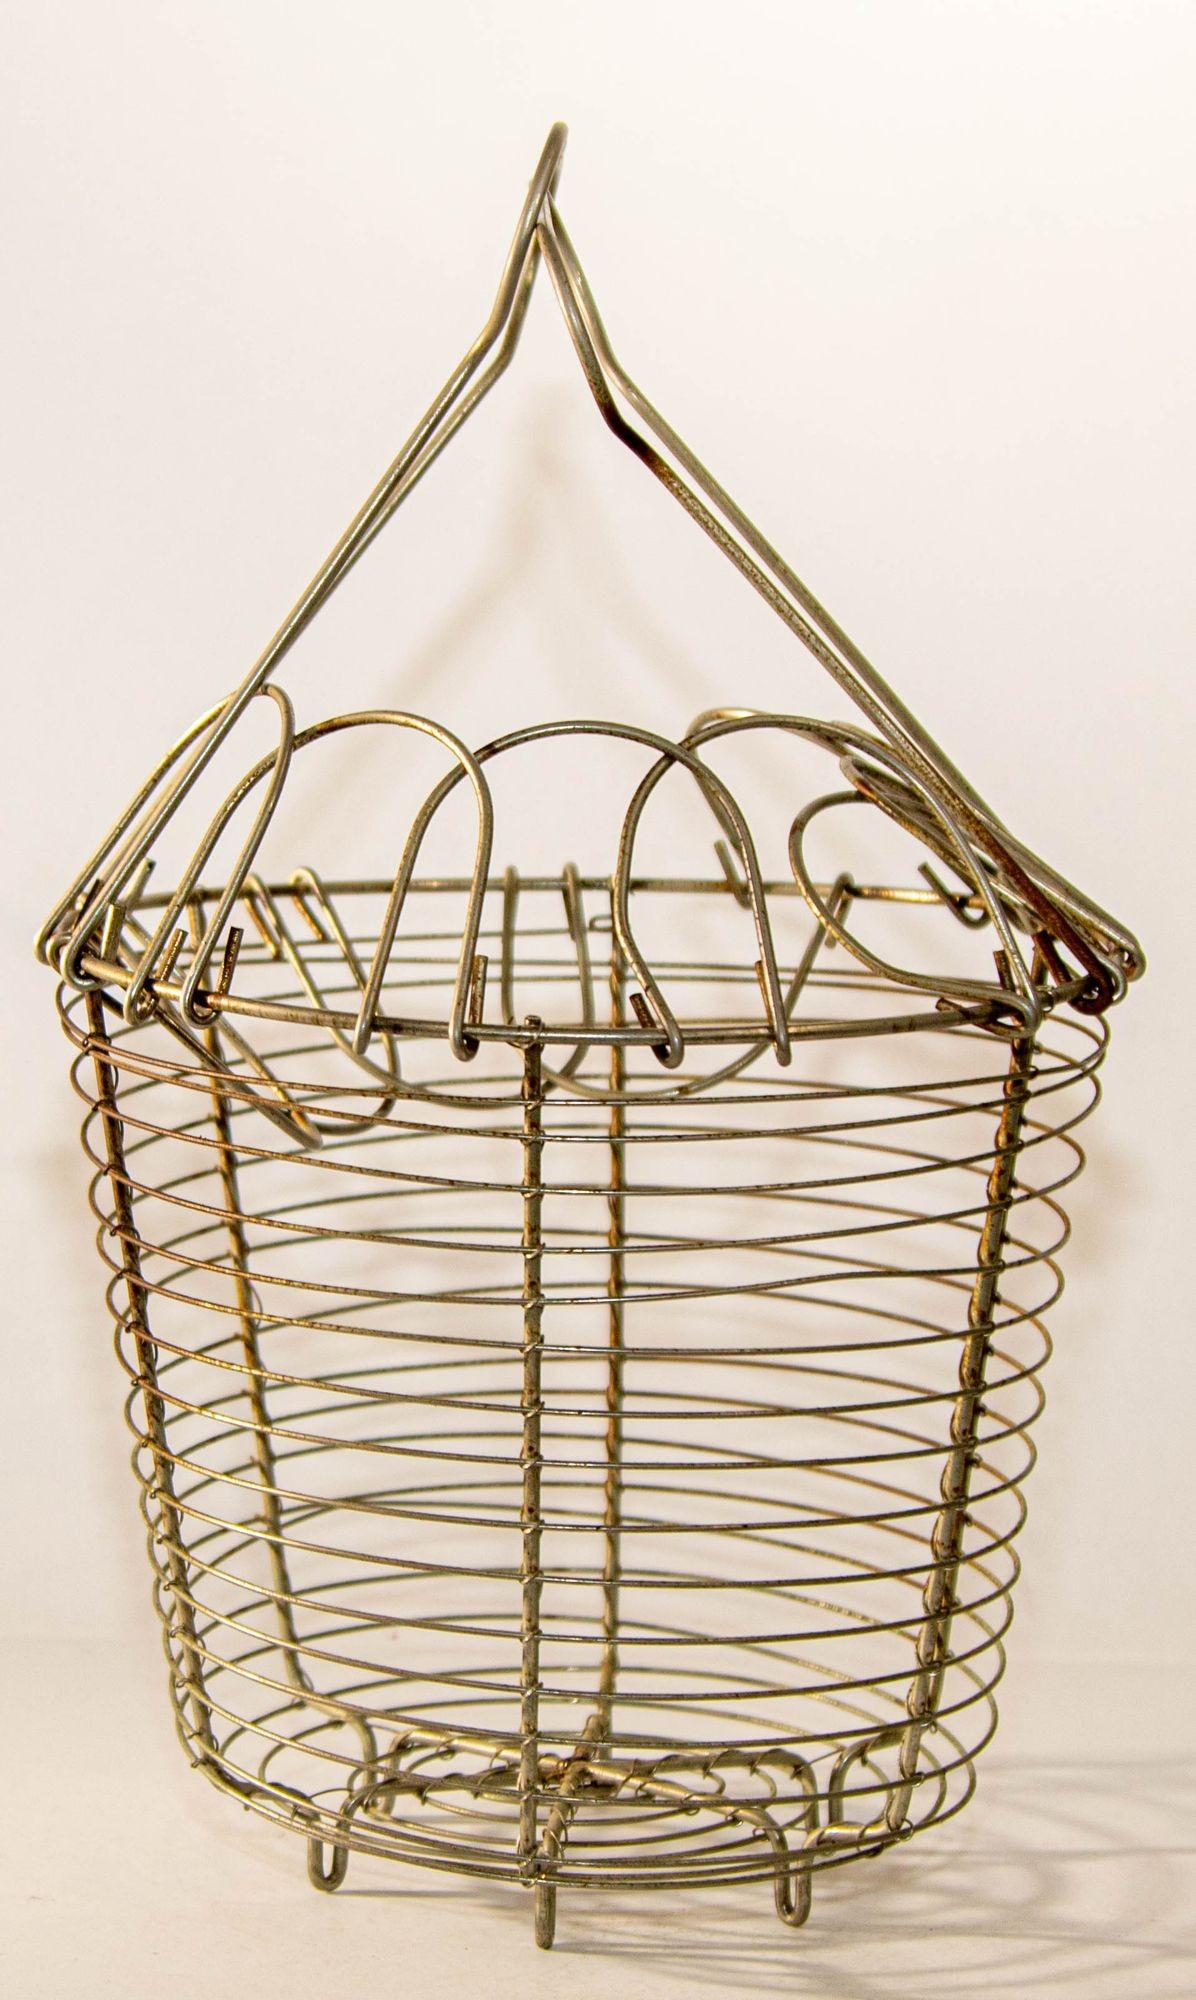 Antique French metal wire egg decorative basket, rustic French farmhouse decor with collapsible zigzag lids and two folding handles, loop feet, the basket has a decorative fold-down daisy-loop top to secure the contents in the basket.
This early